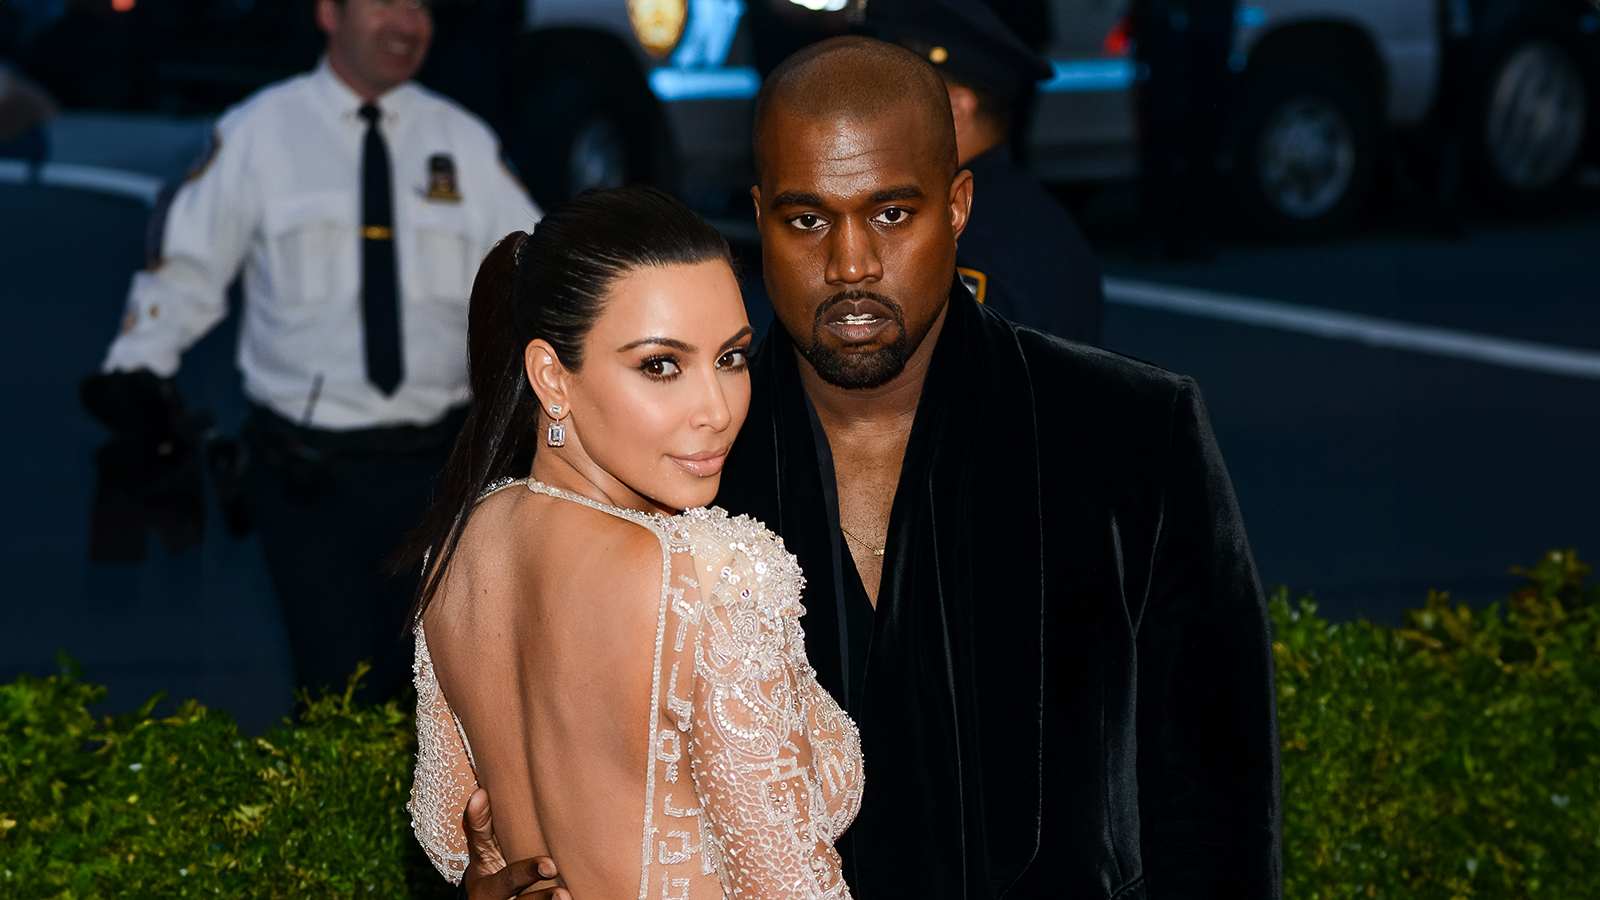 New York, NY Monday May 04, 2015: Kim Kardashian and Kanye West attend 'China: Through The Looking Glass' Costume Institute Gala, held at the Metropolitan Museum of Art in New York City, New York.